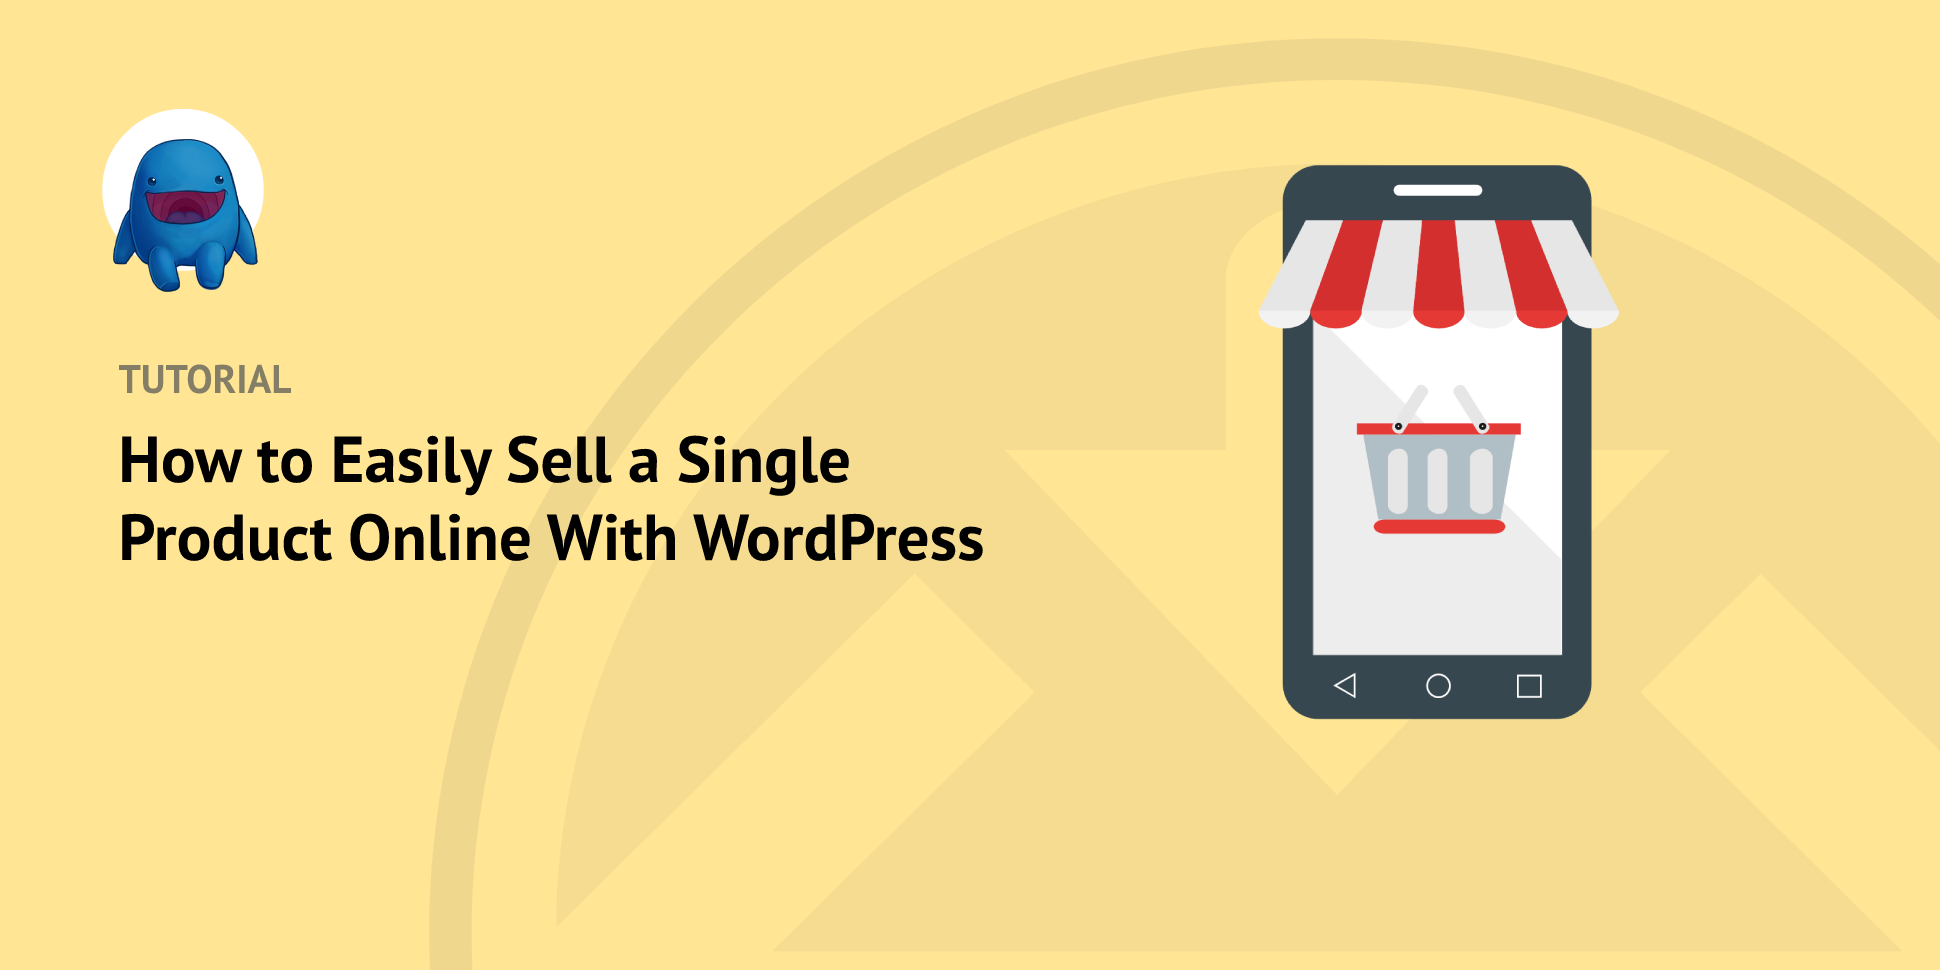 How to Sell a Single Product Online With WordPress